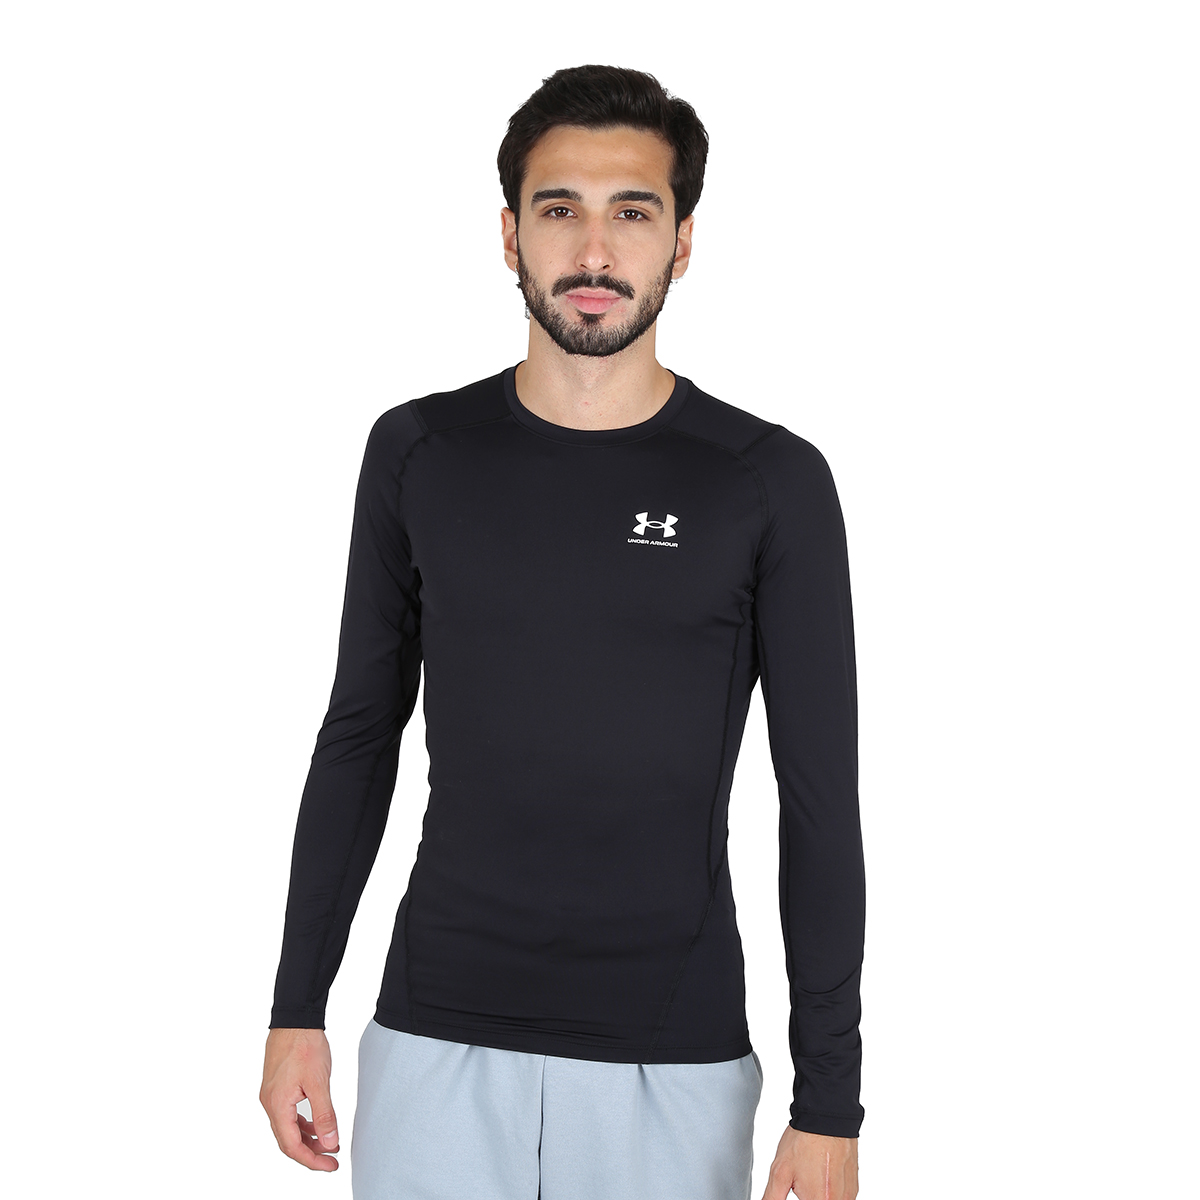 Remera Trainging Under Armour Heatgear Hombre,  image number null